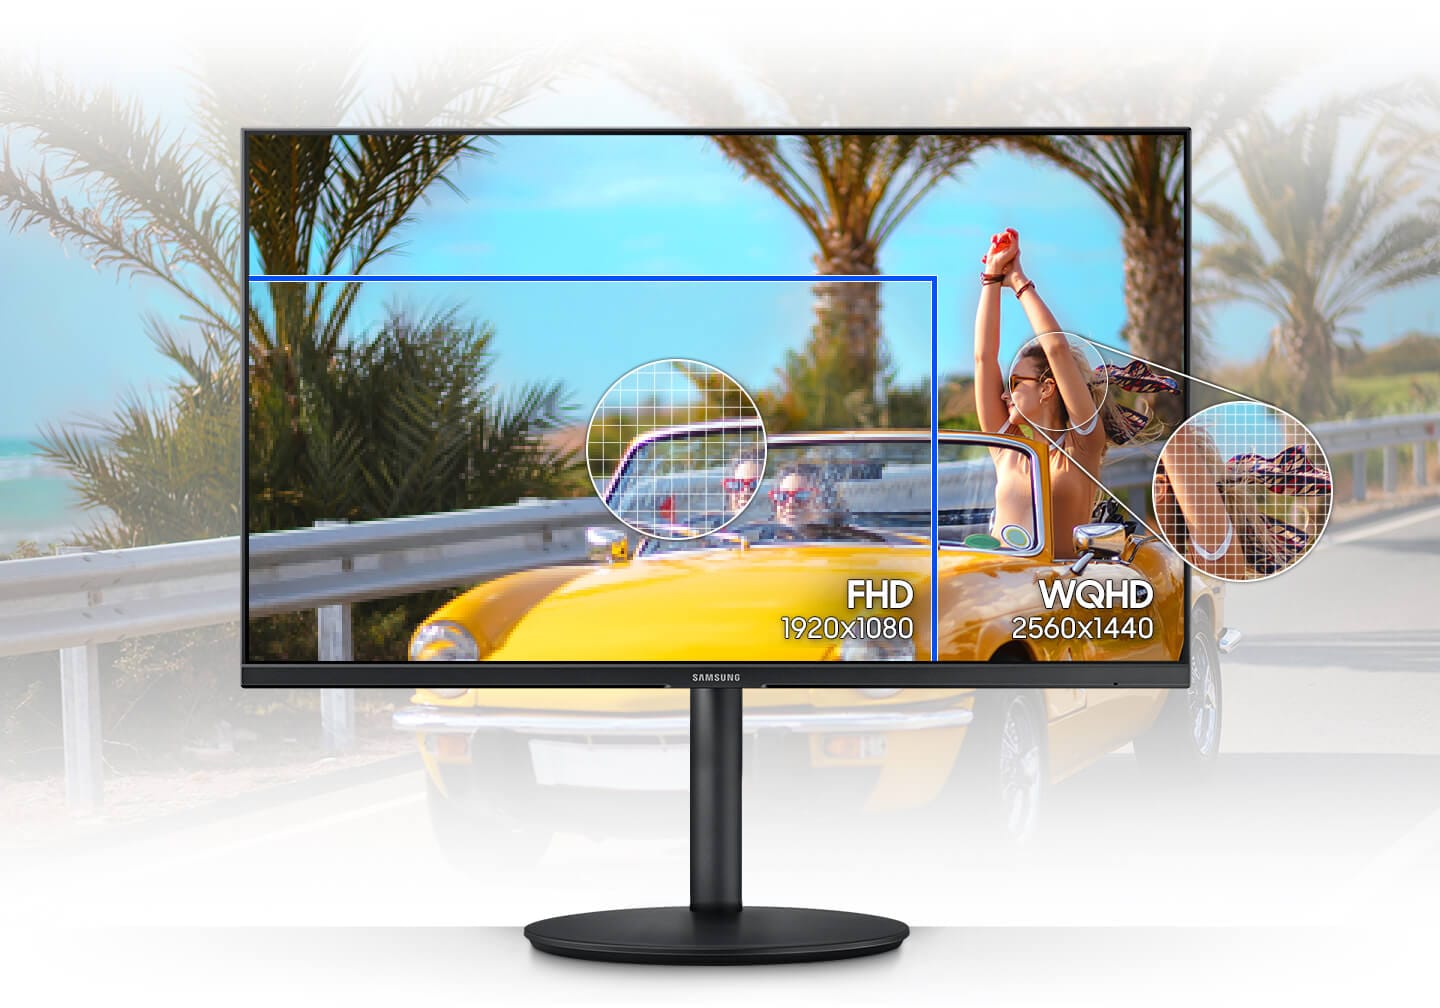 FHD resolution image is extended to WQHD which implies one can see more and in detail on the same size of monitor screen.